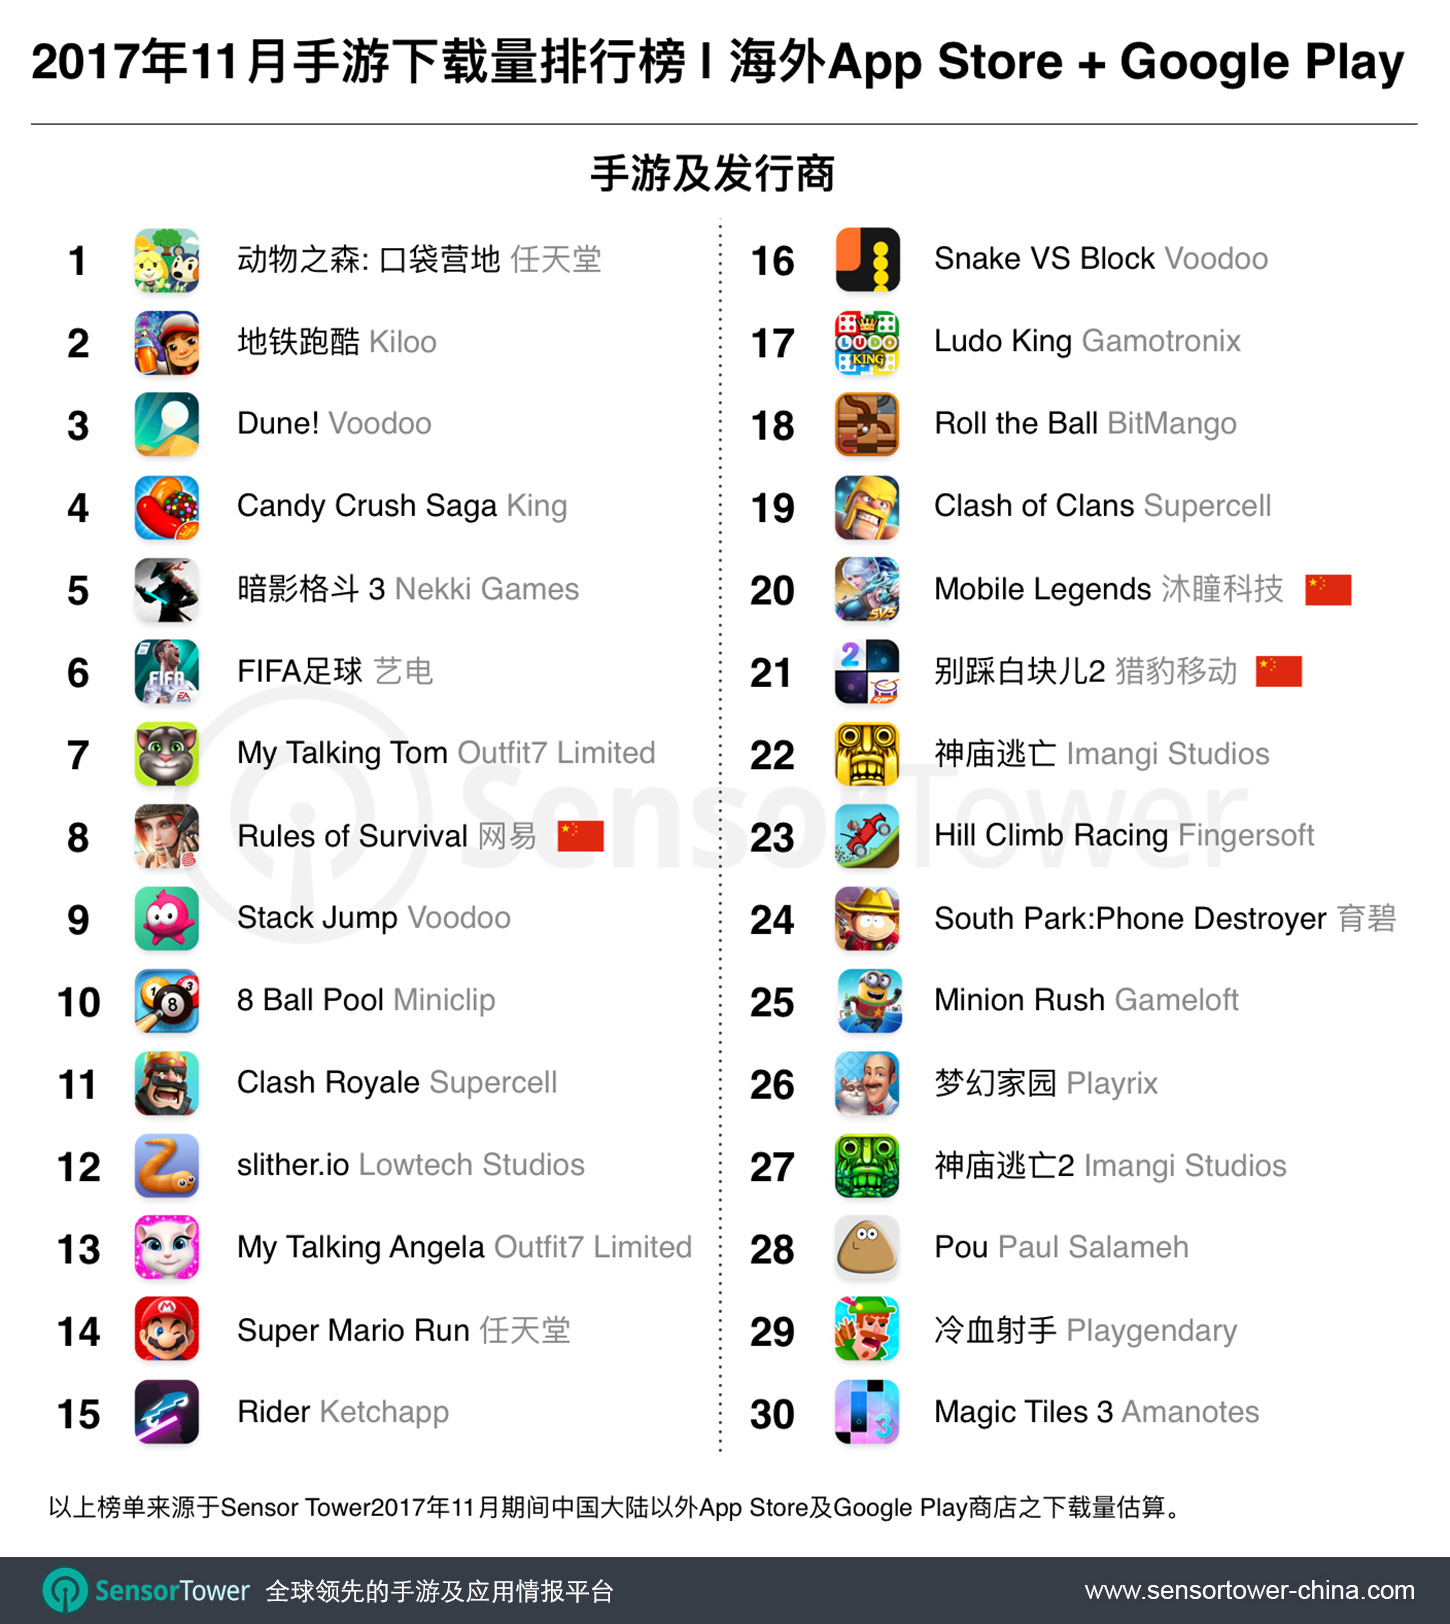 Nov 2017 Top 30 Most Downloaded Games Outside China